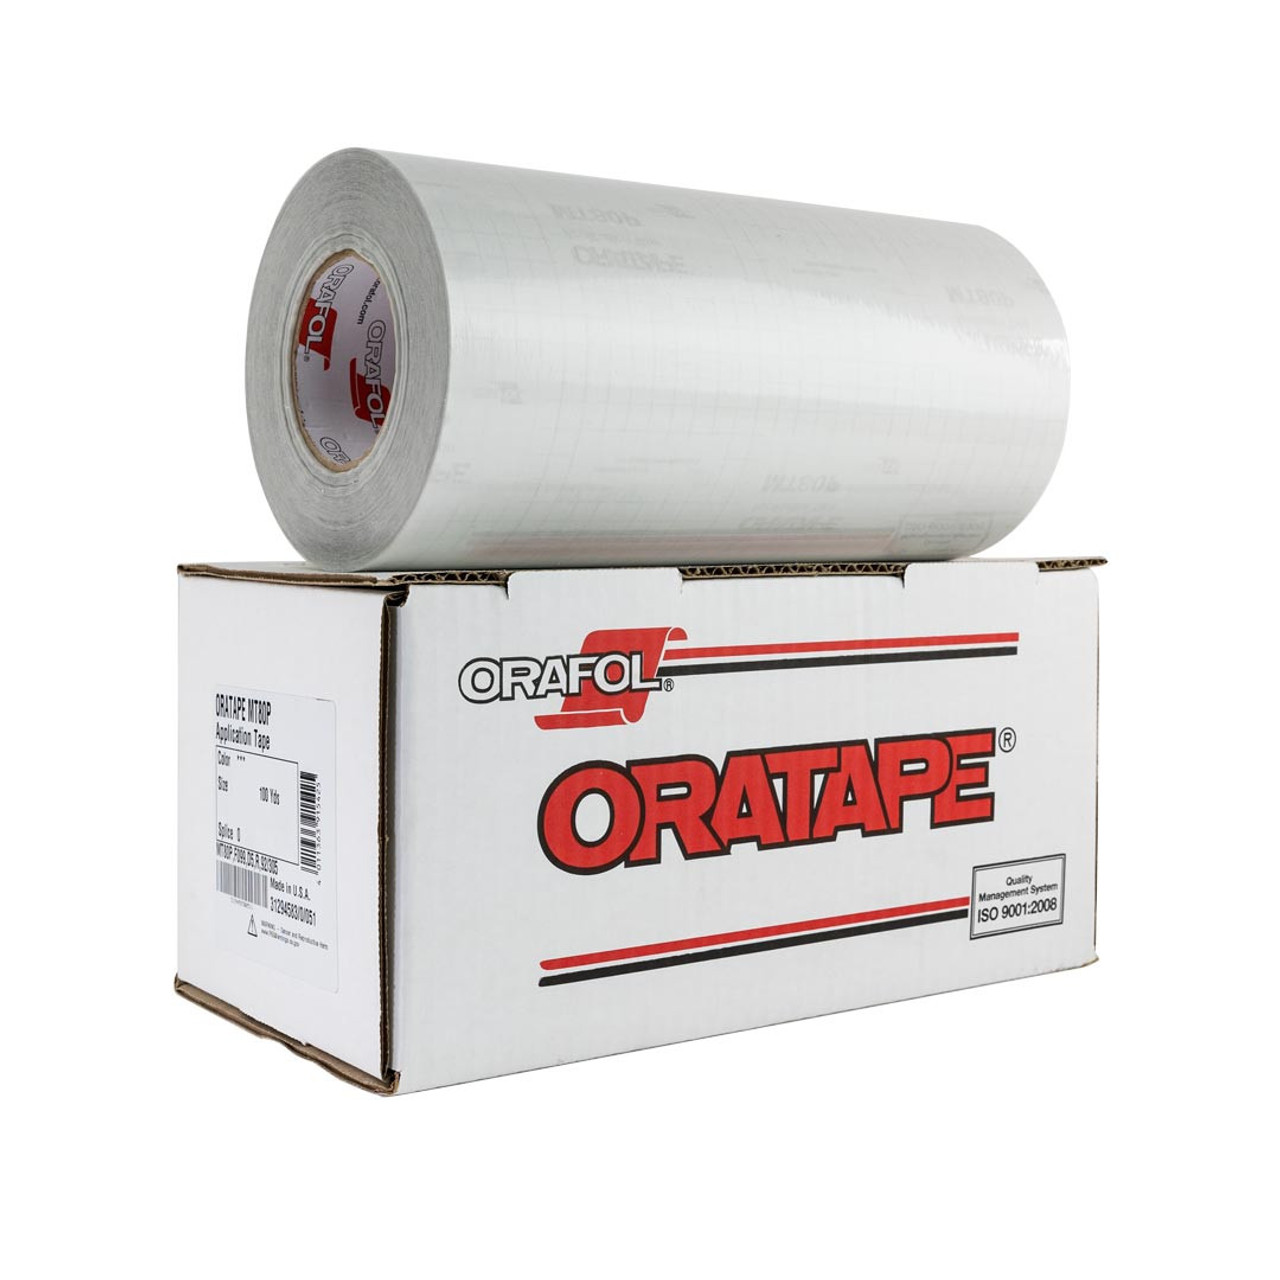 Transfer Tape for Vinyl, 6 inch x 300 feet, Paper with Medium-High